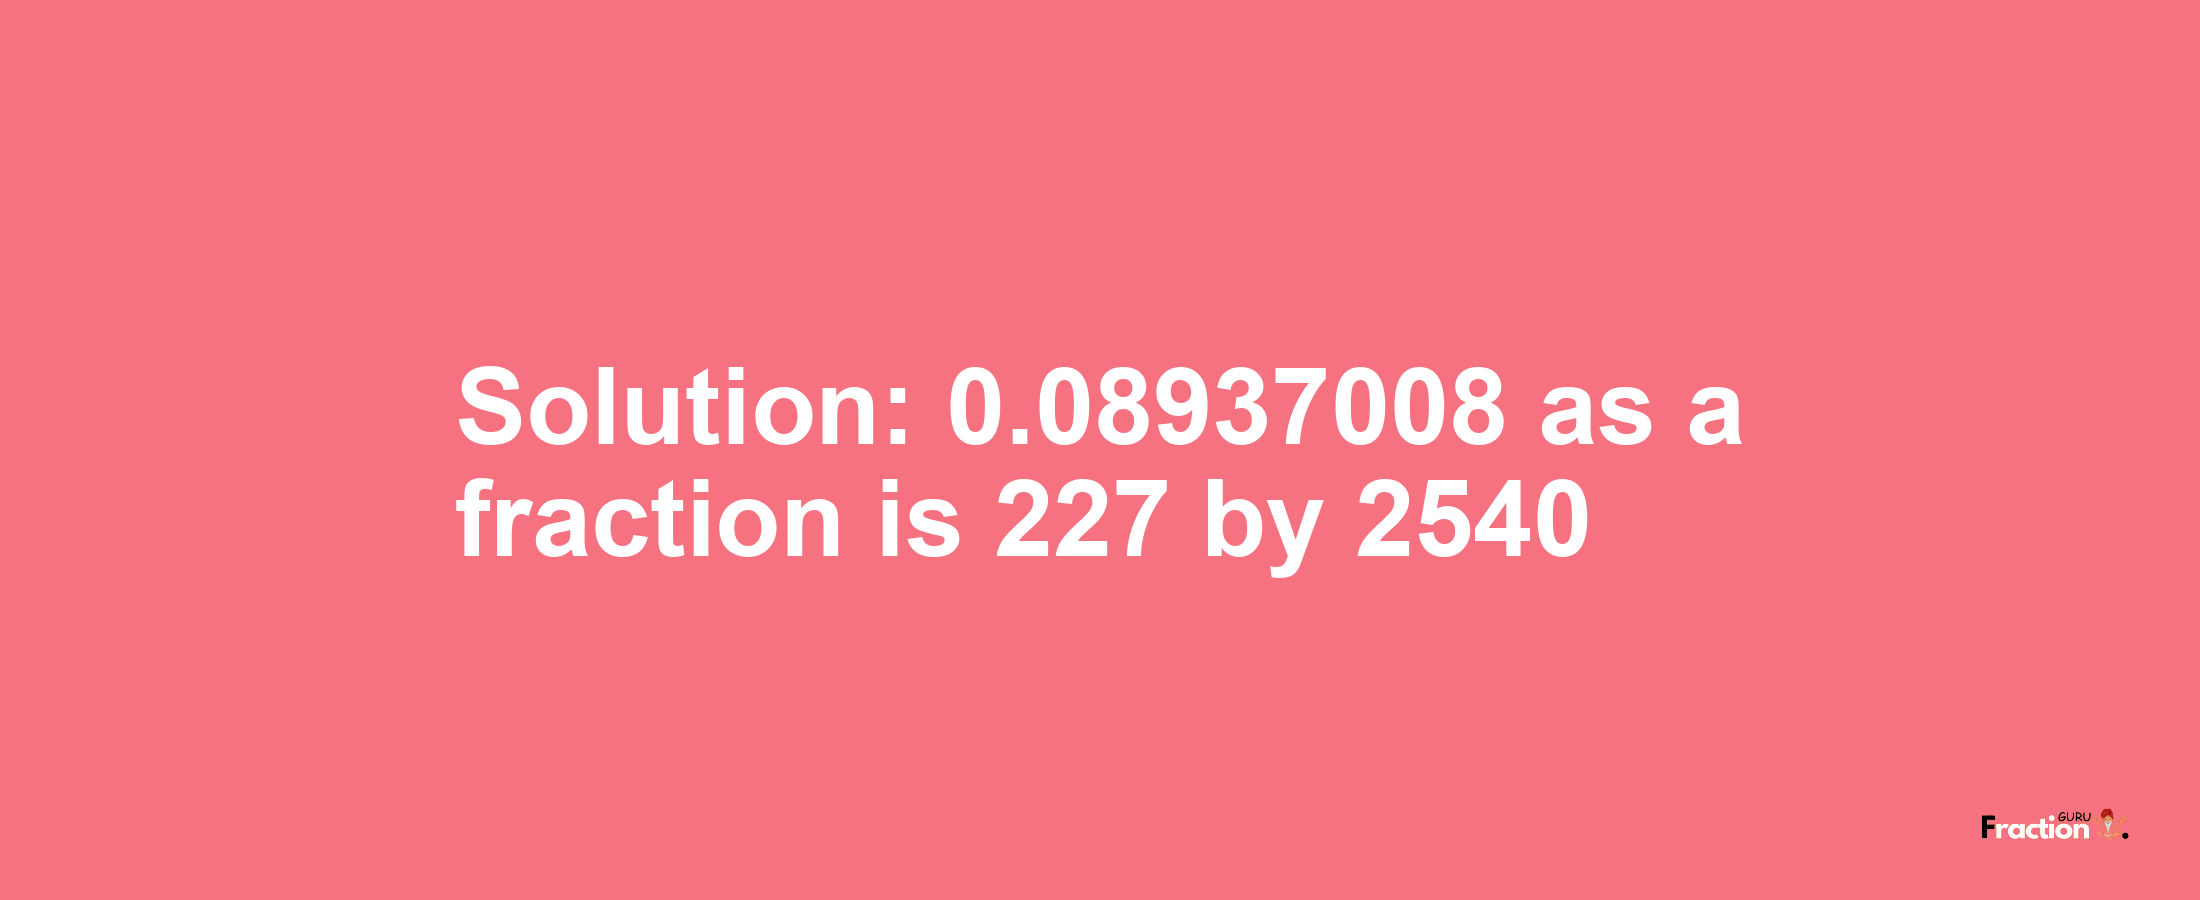 Solution:0.08937008 as a fraction is 227/2540